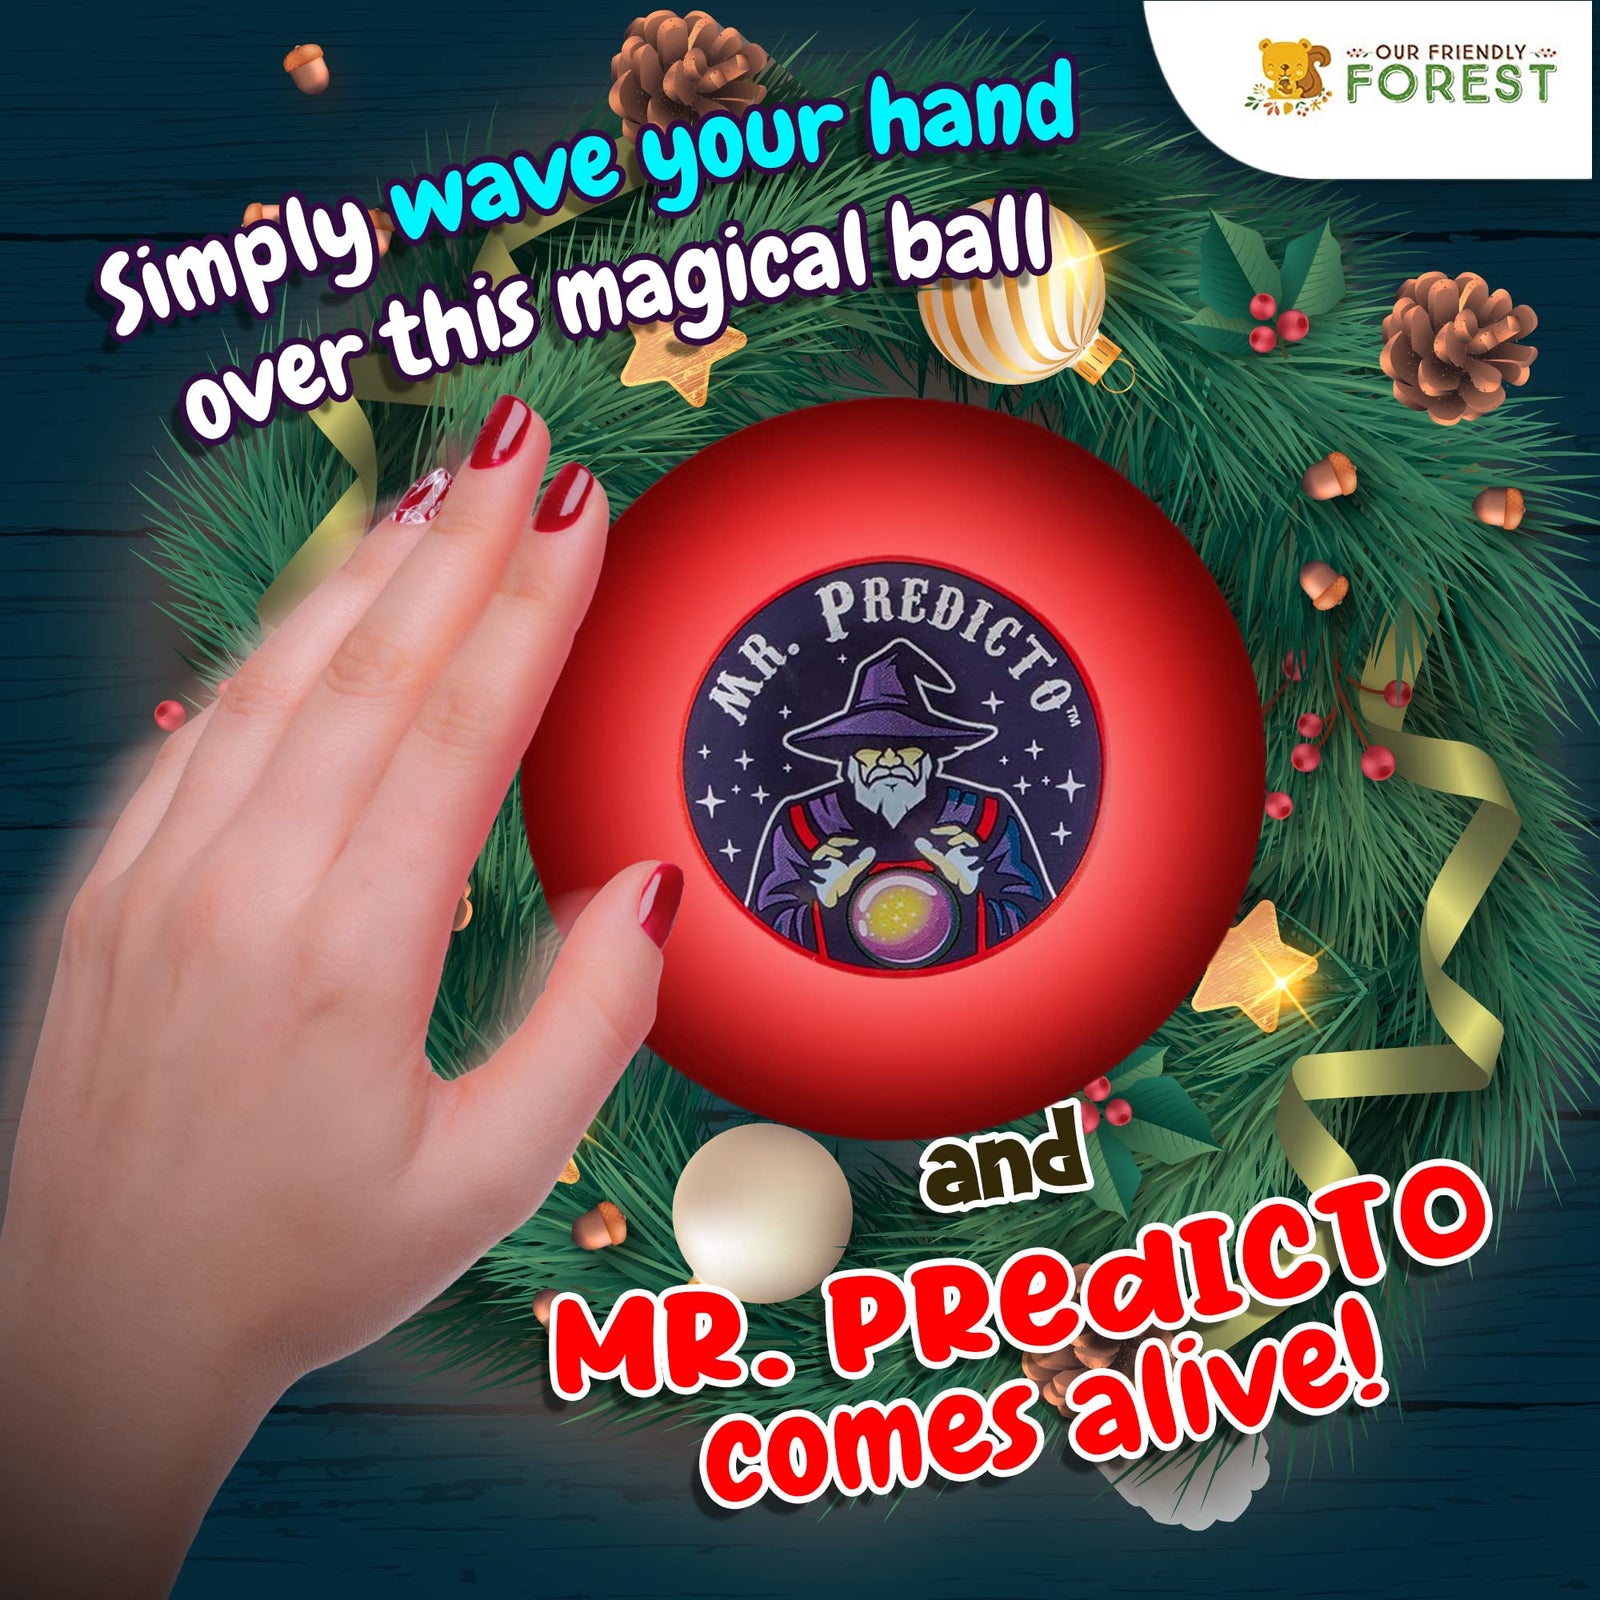 Mr. Predicto Plastic Fortune Telling Ball - Christmas Stocking Stuffer for Kids - Talking Crystal Ball Toy Like Magic 8 Ball - Ask a YES or NO Question & He'll Magically Light Up & Speak the Answer